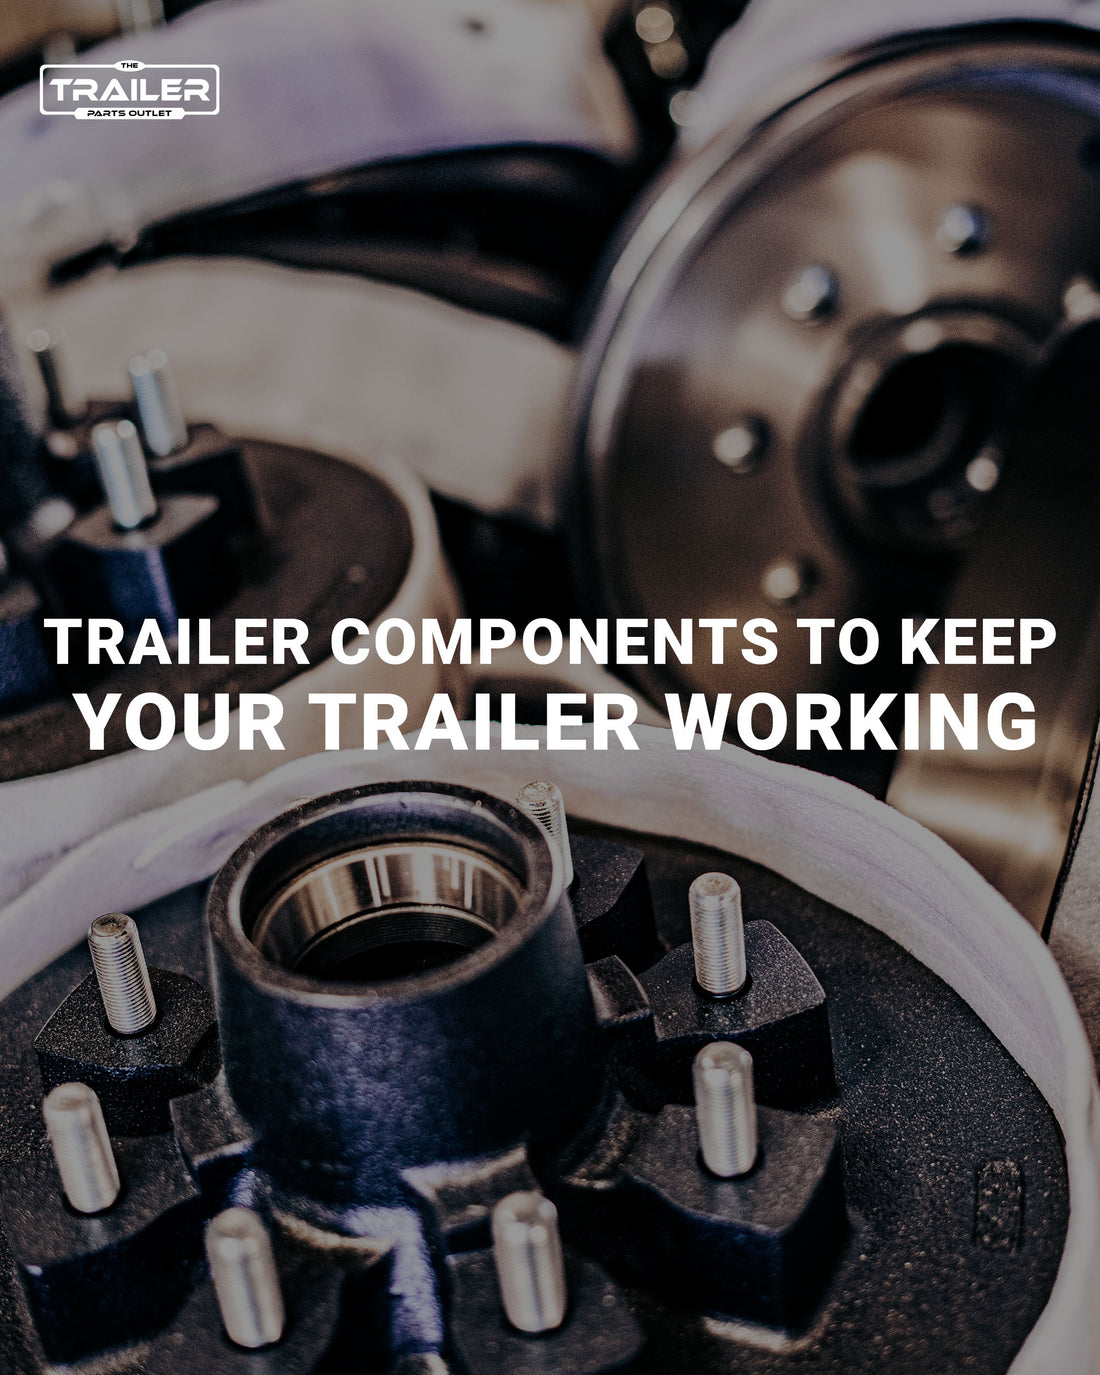 Trailer Components to Keep Your Trailer Working at its Best